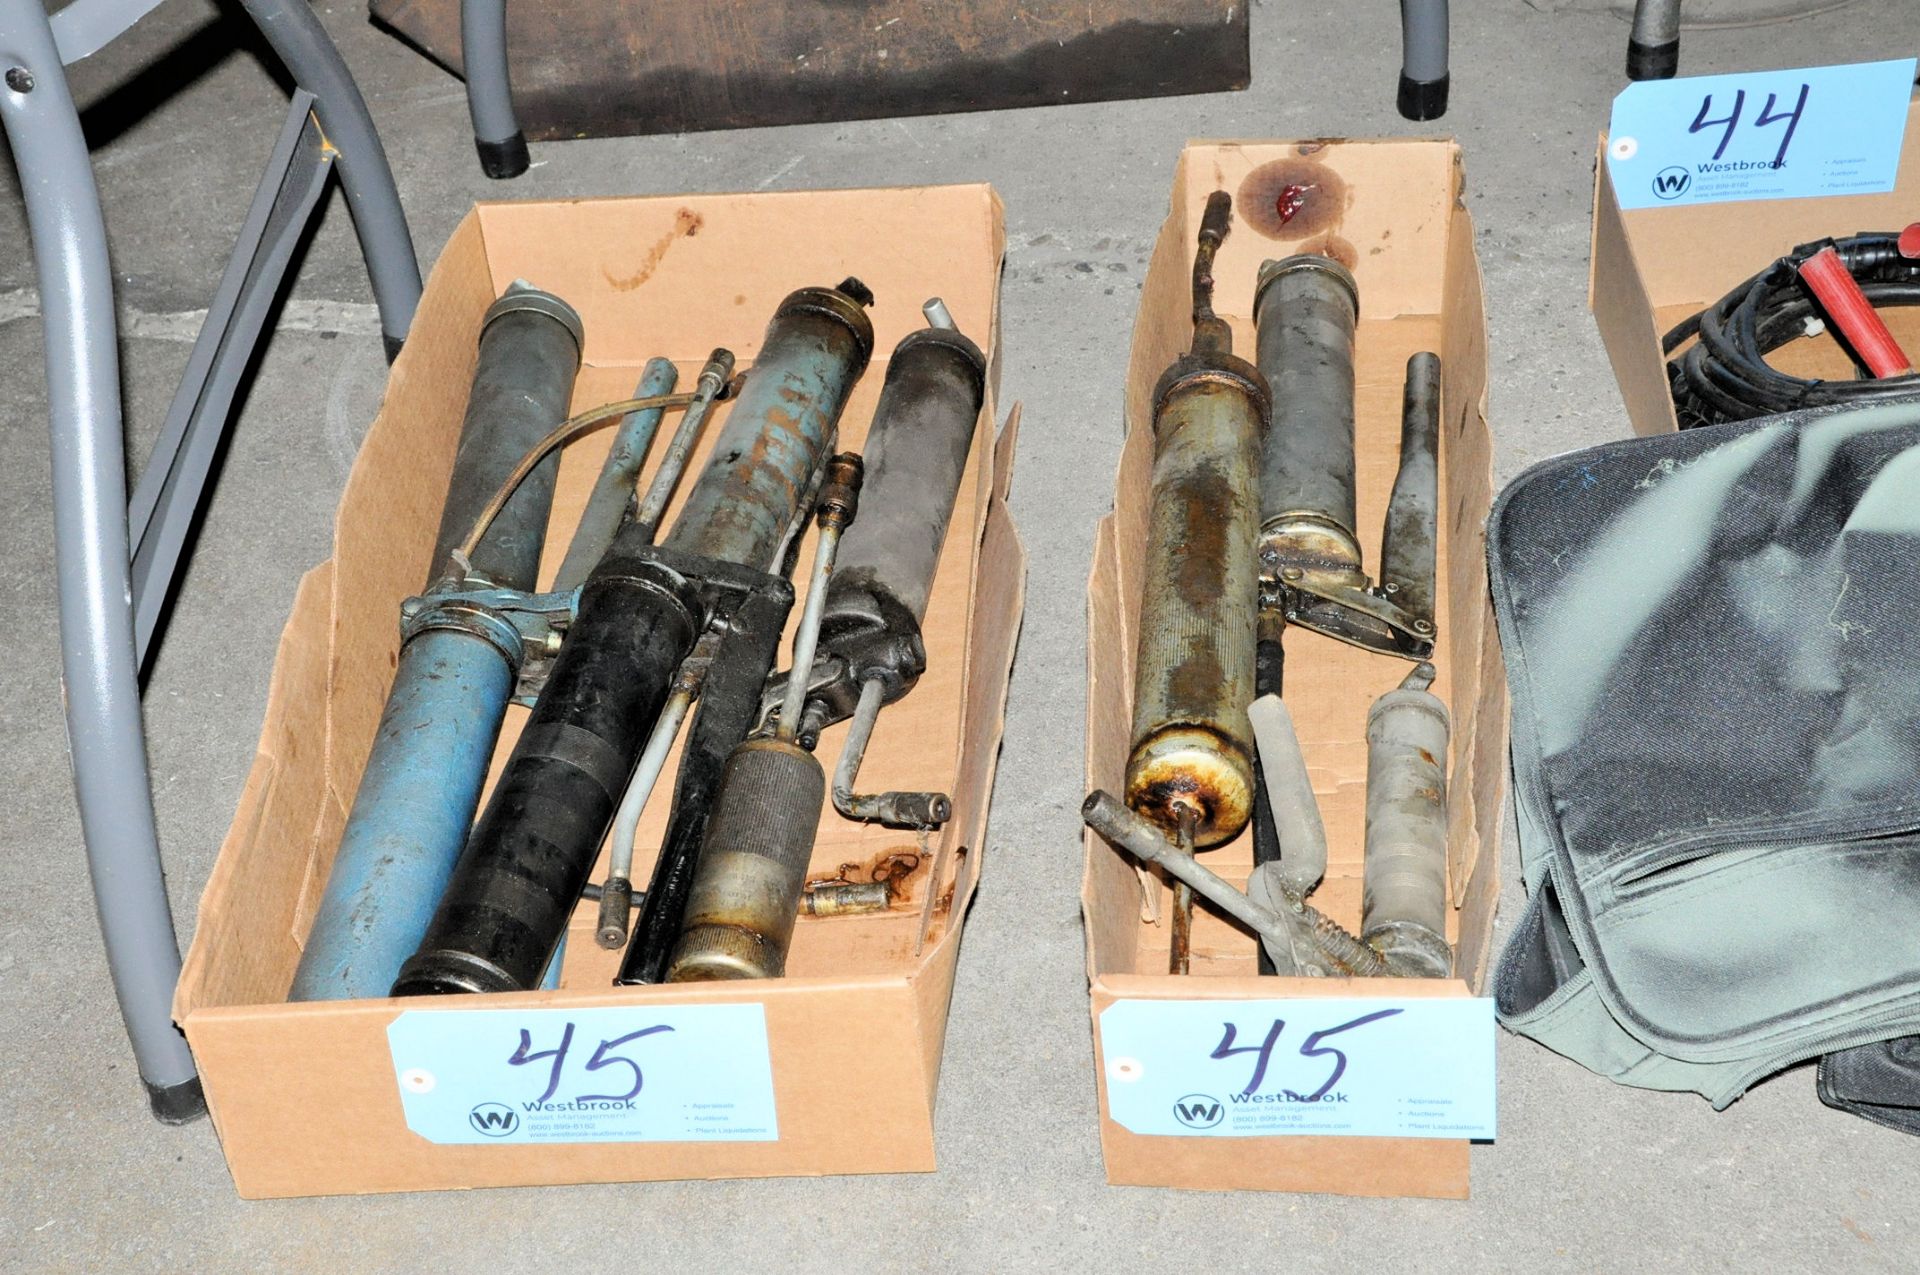 Lot-Various Grease Guns in (2) Boxes on Floor Under (1) Table